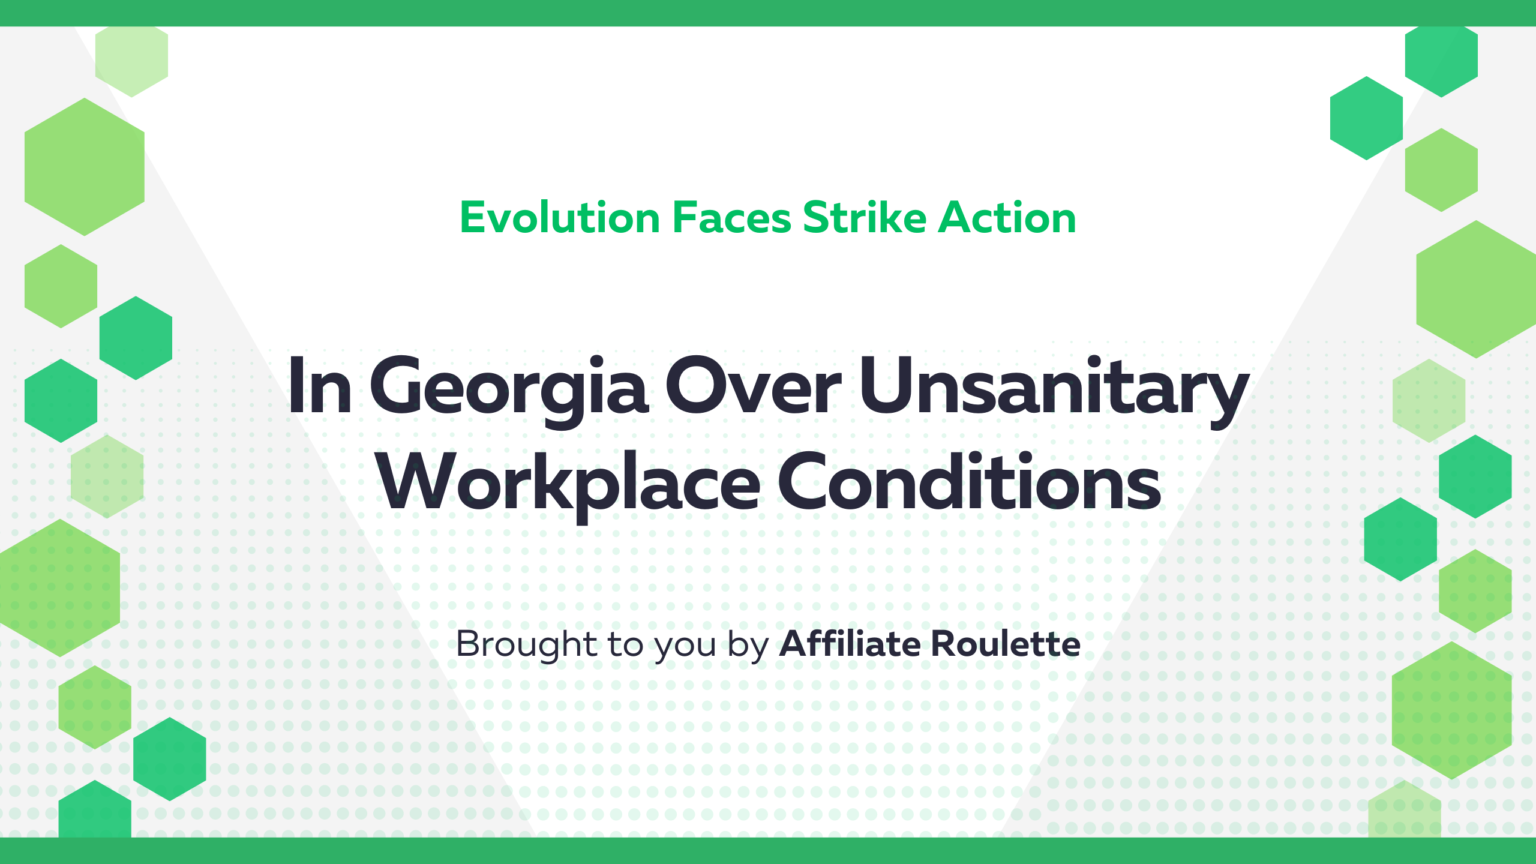 Evolution Faces Strike Action in Georgia Over Unsanitary Workplace Conditions